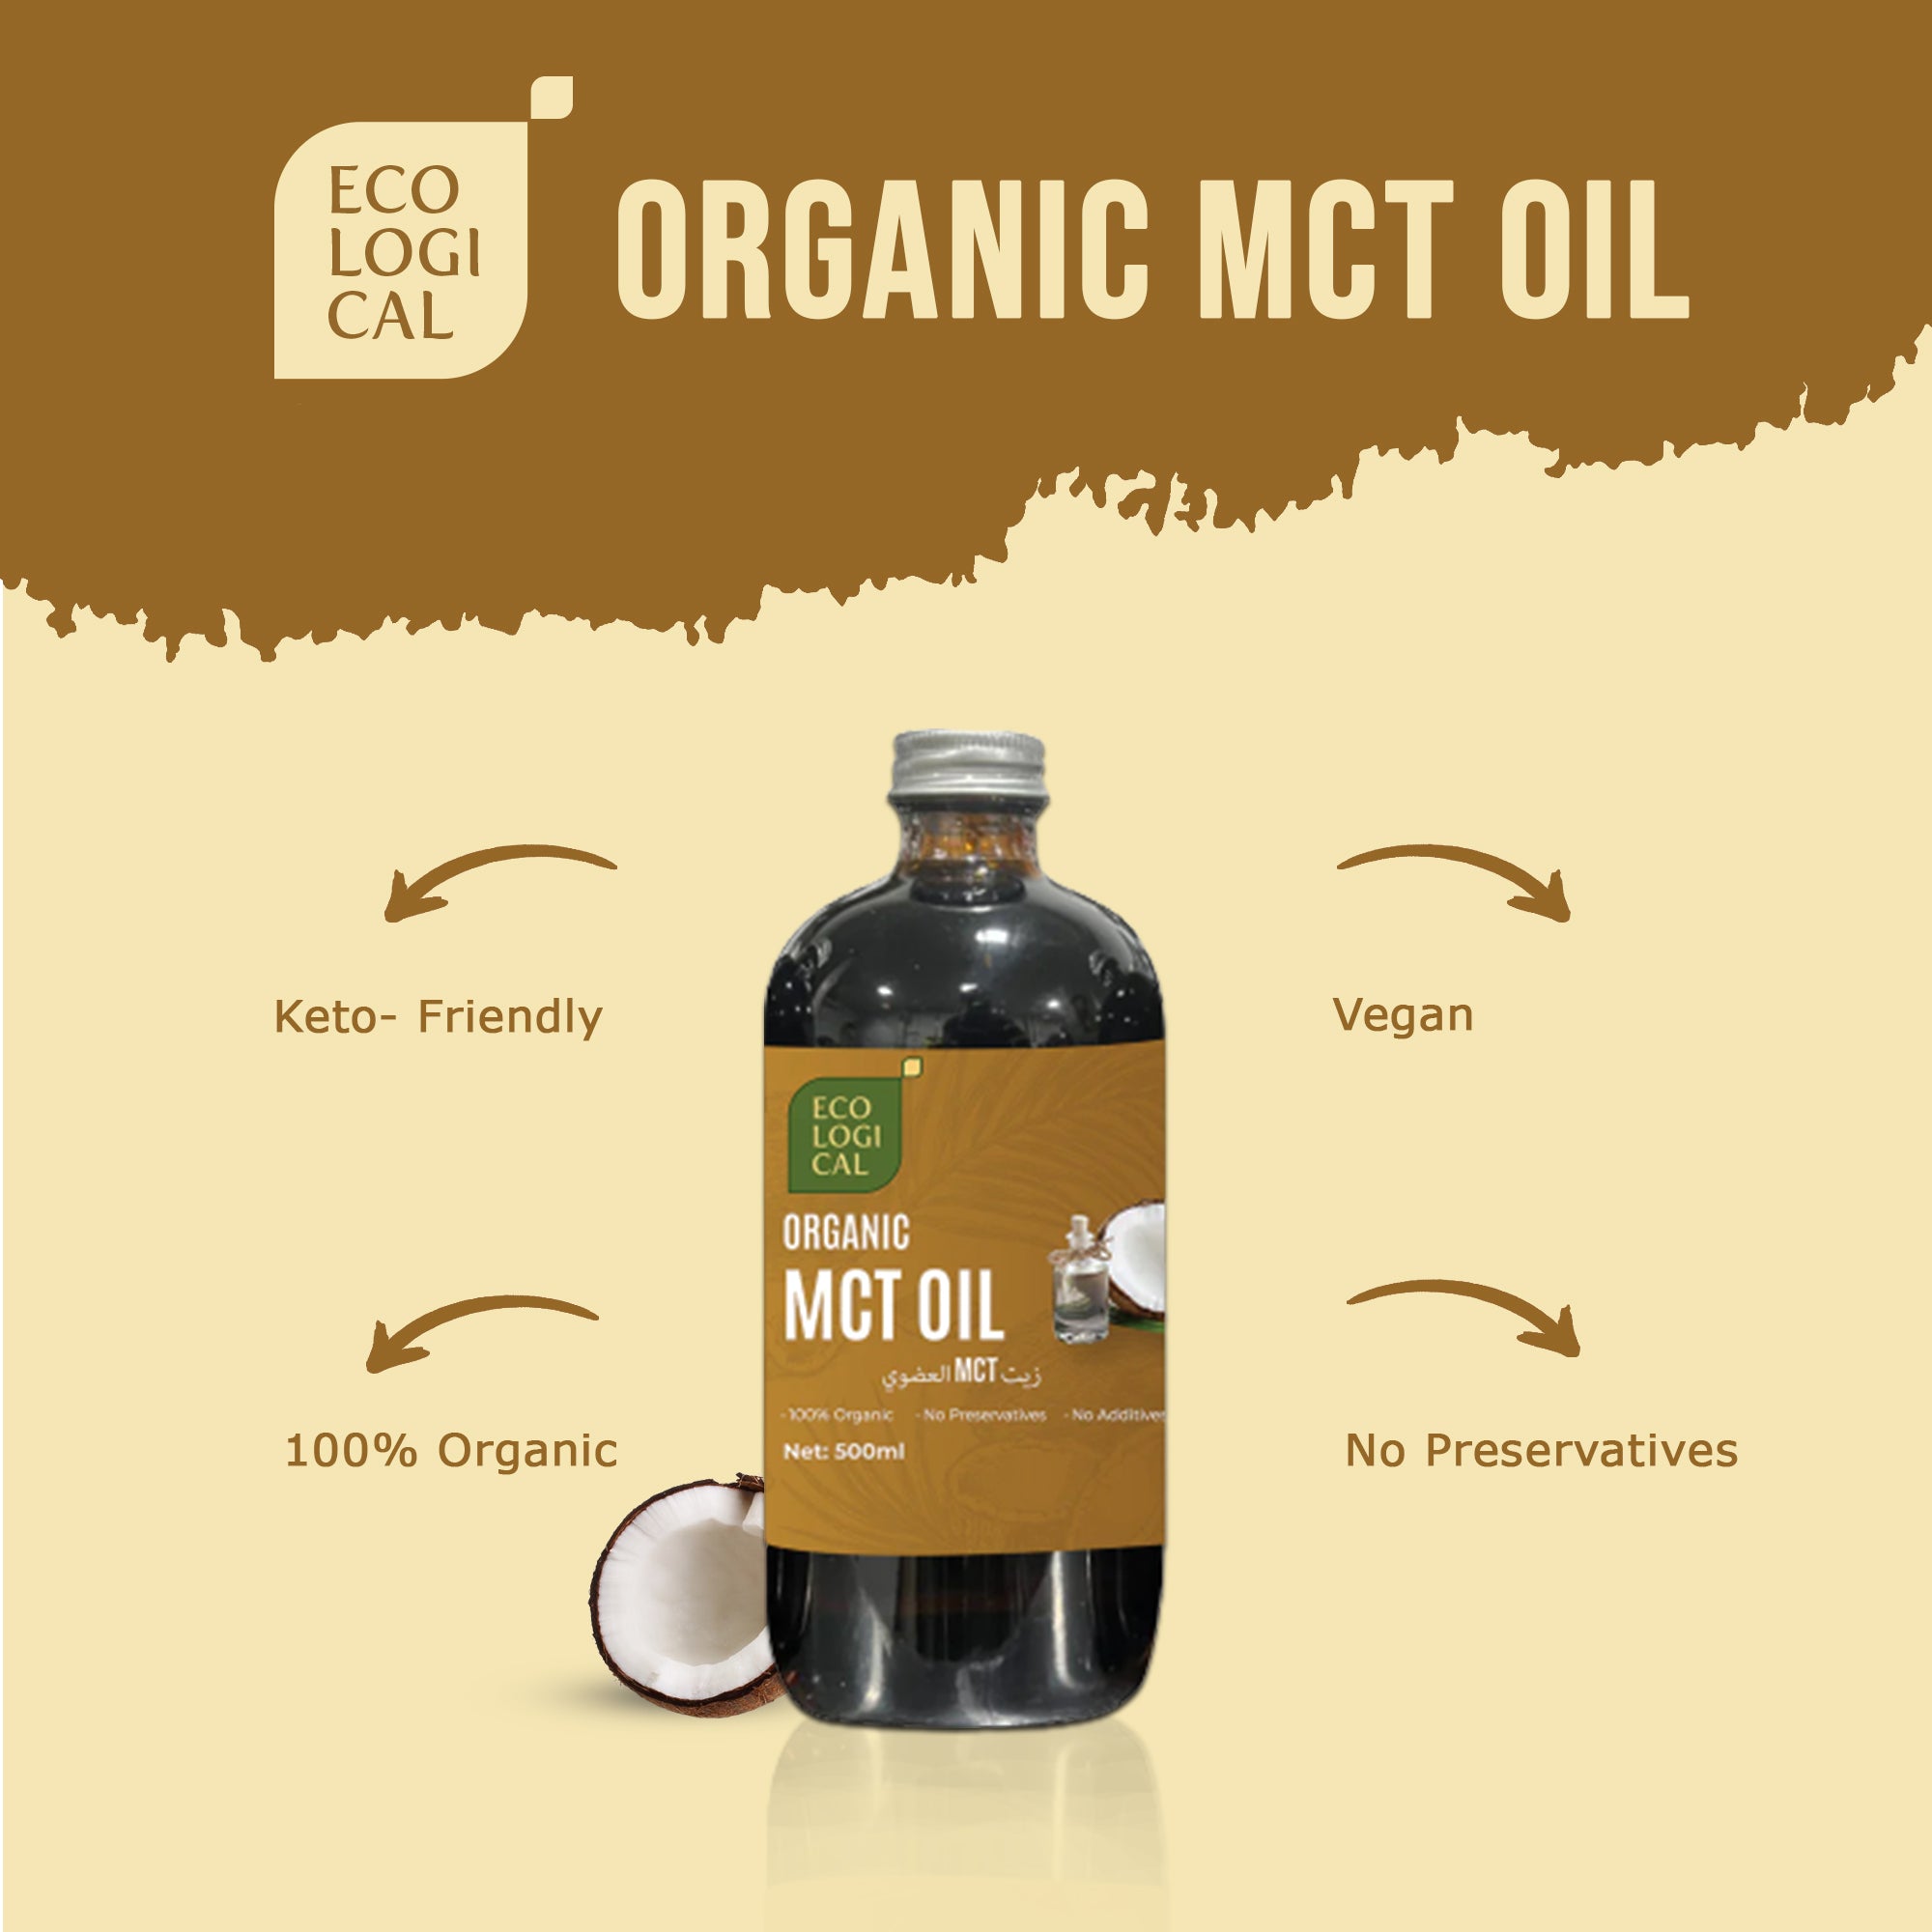 Pure ECOLOGICAL Organic MCT Oil - Premium 500ml for Clean Energy and Wellness